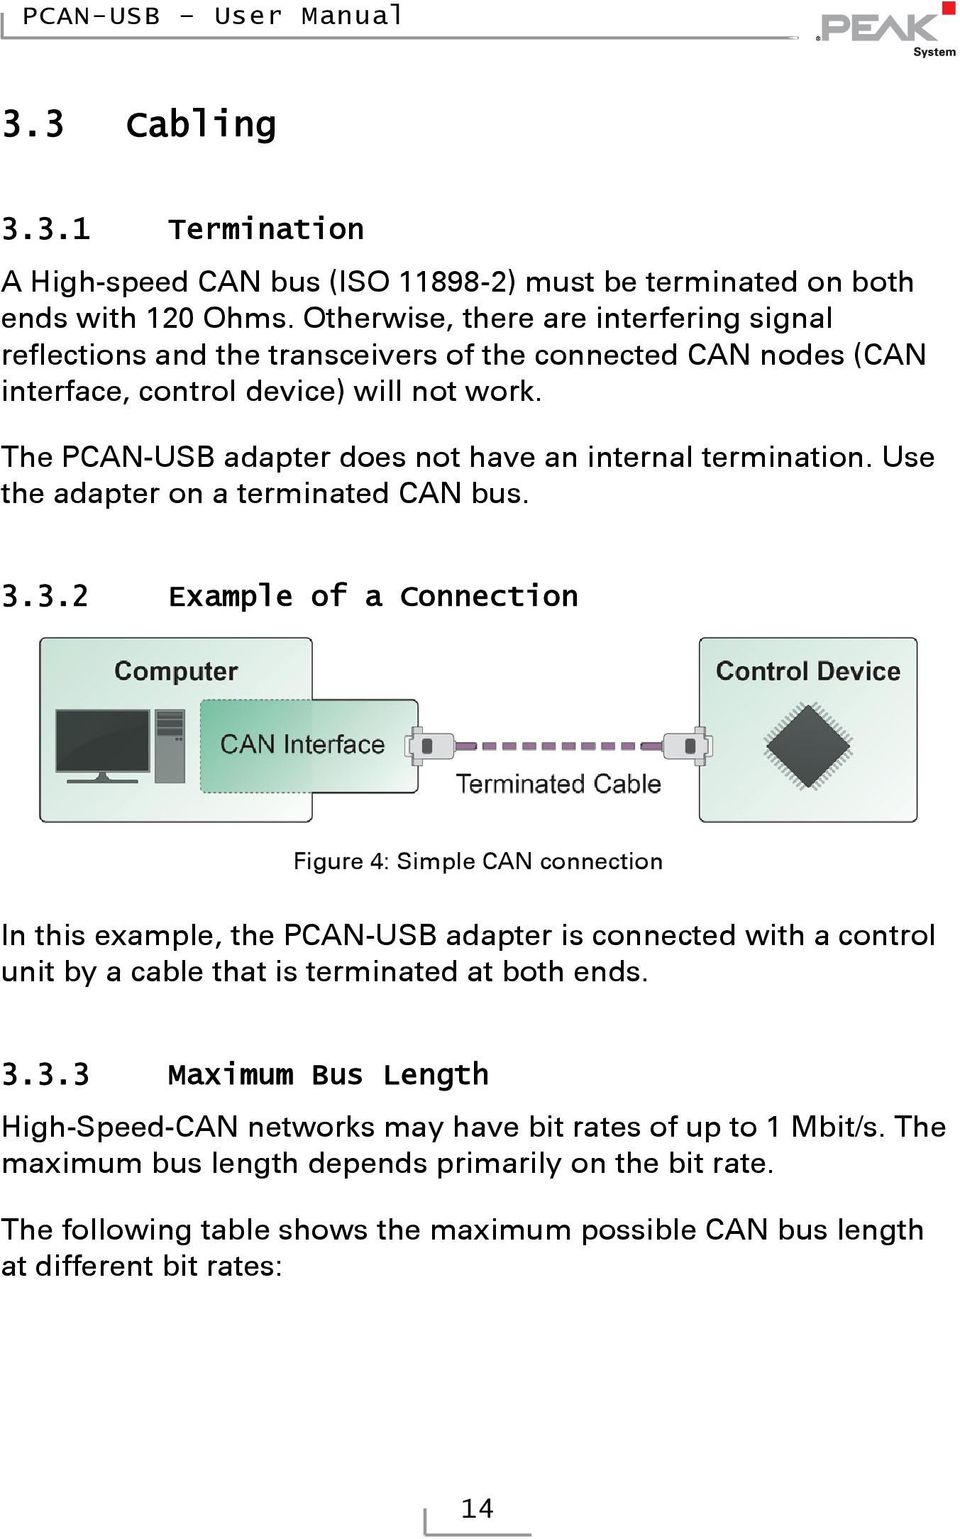 The PCAN-USB adapter does not have an internal termination. Use the adapter on a terminated CAN bus. 3.